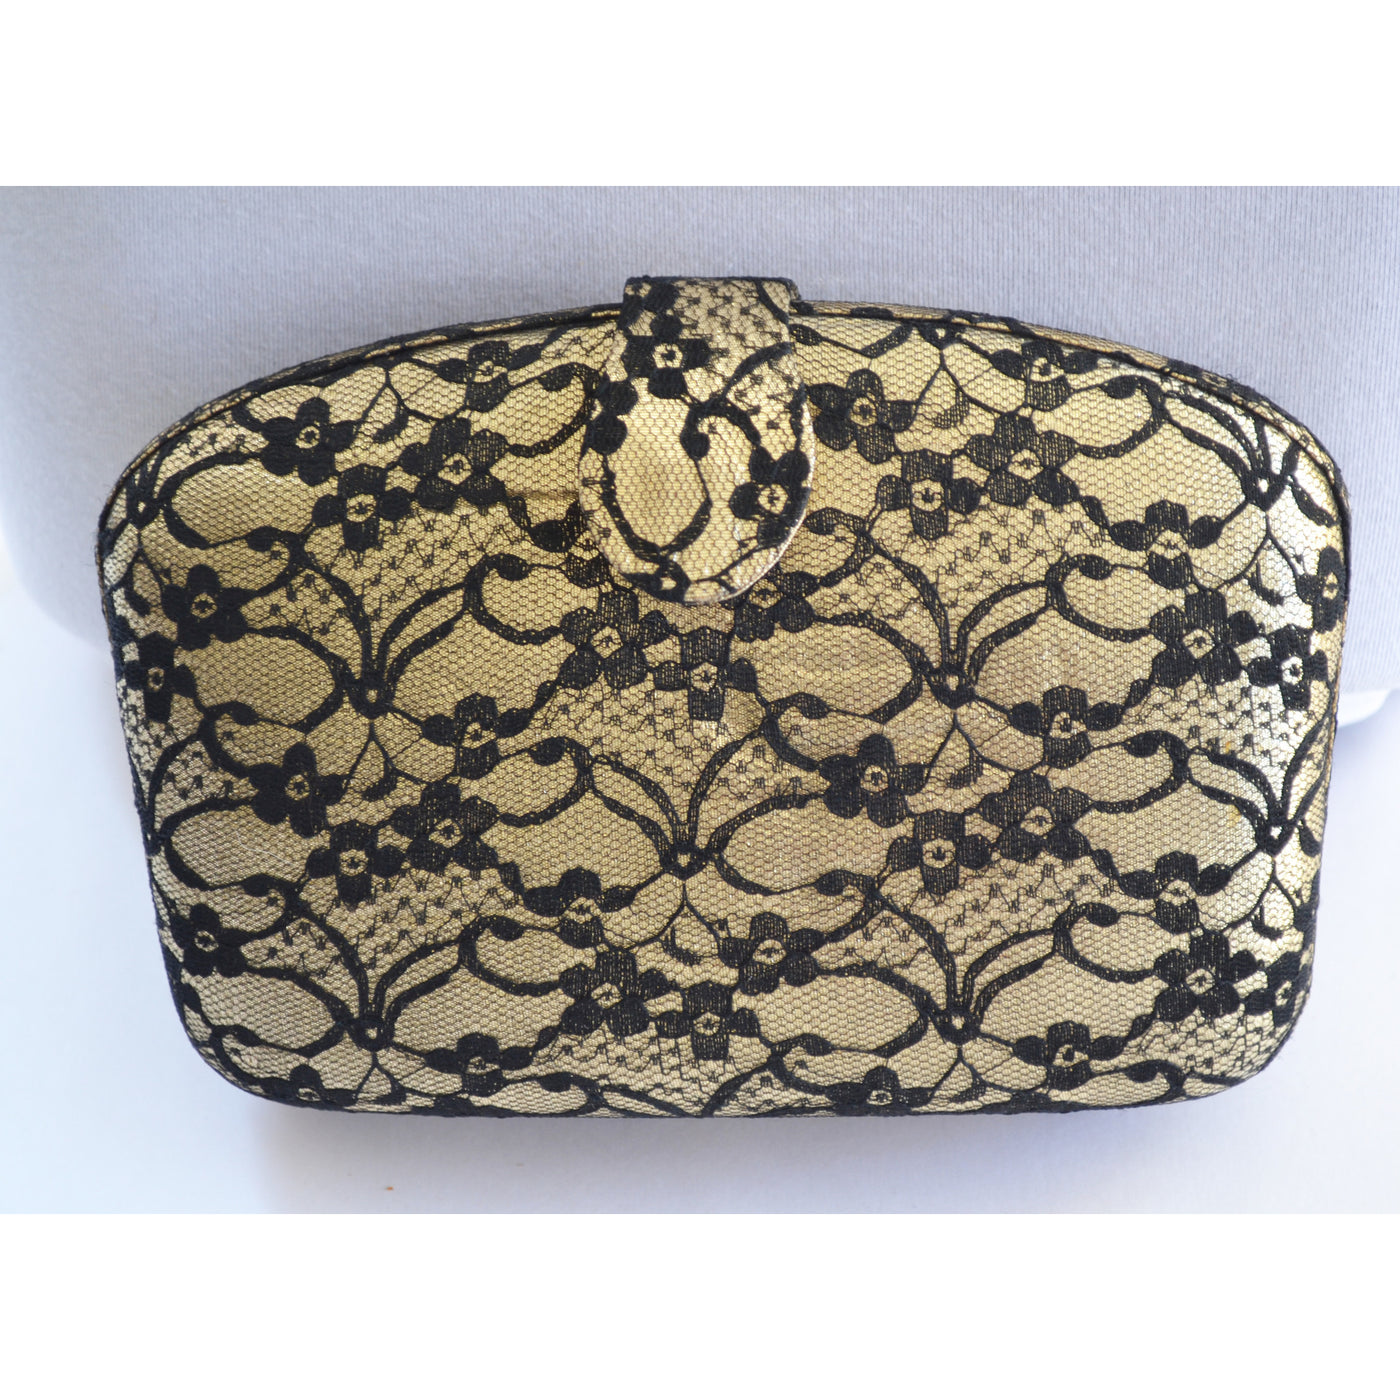 Vintage Gold & Lace Clutch Purse By Whiting & Davis 